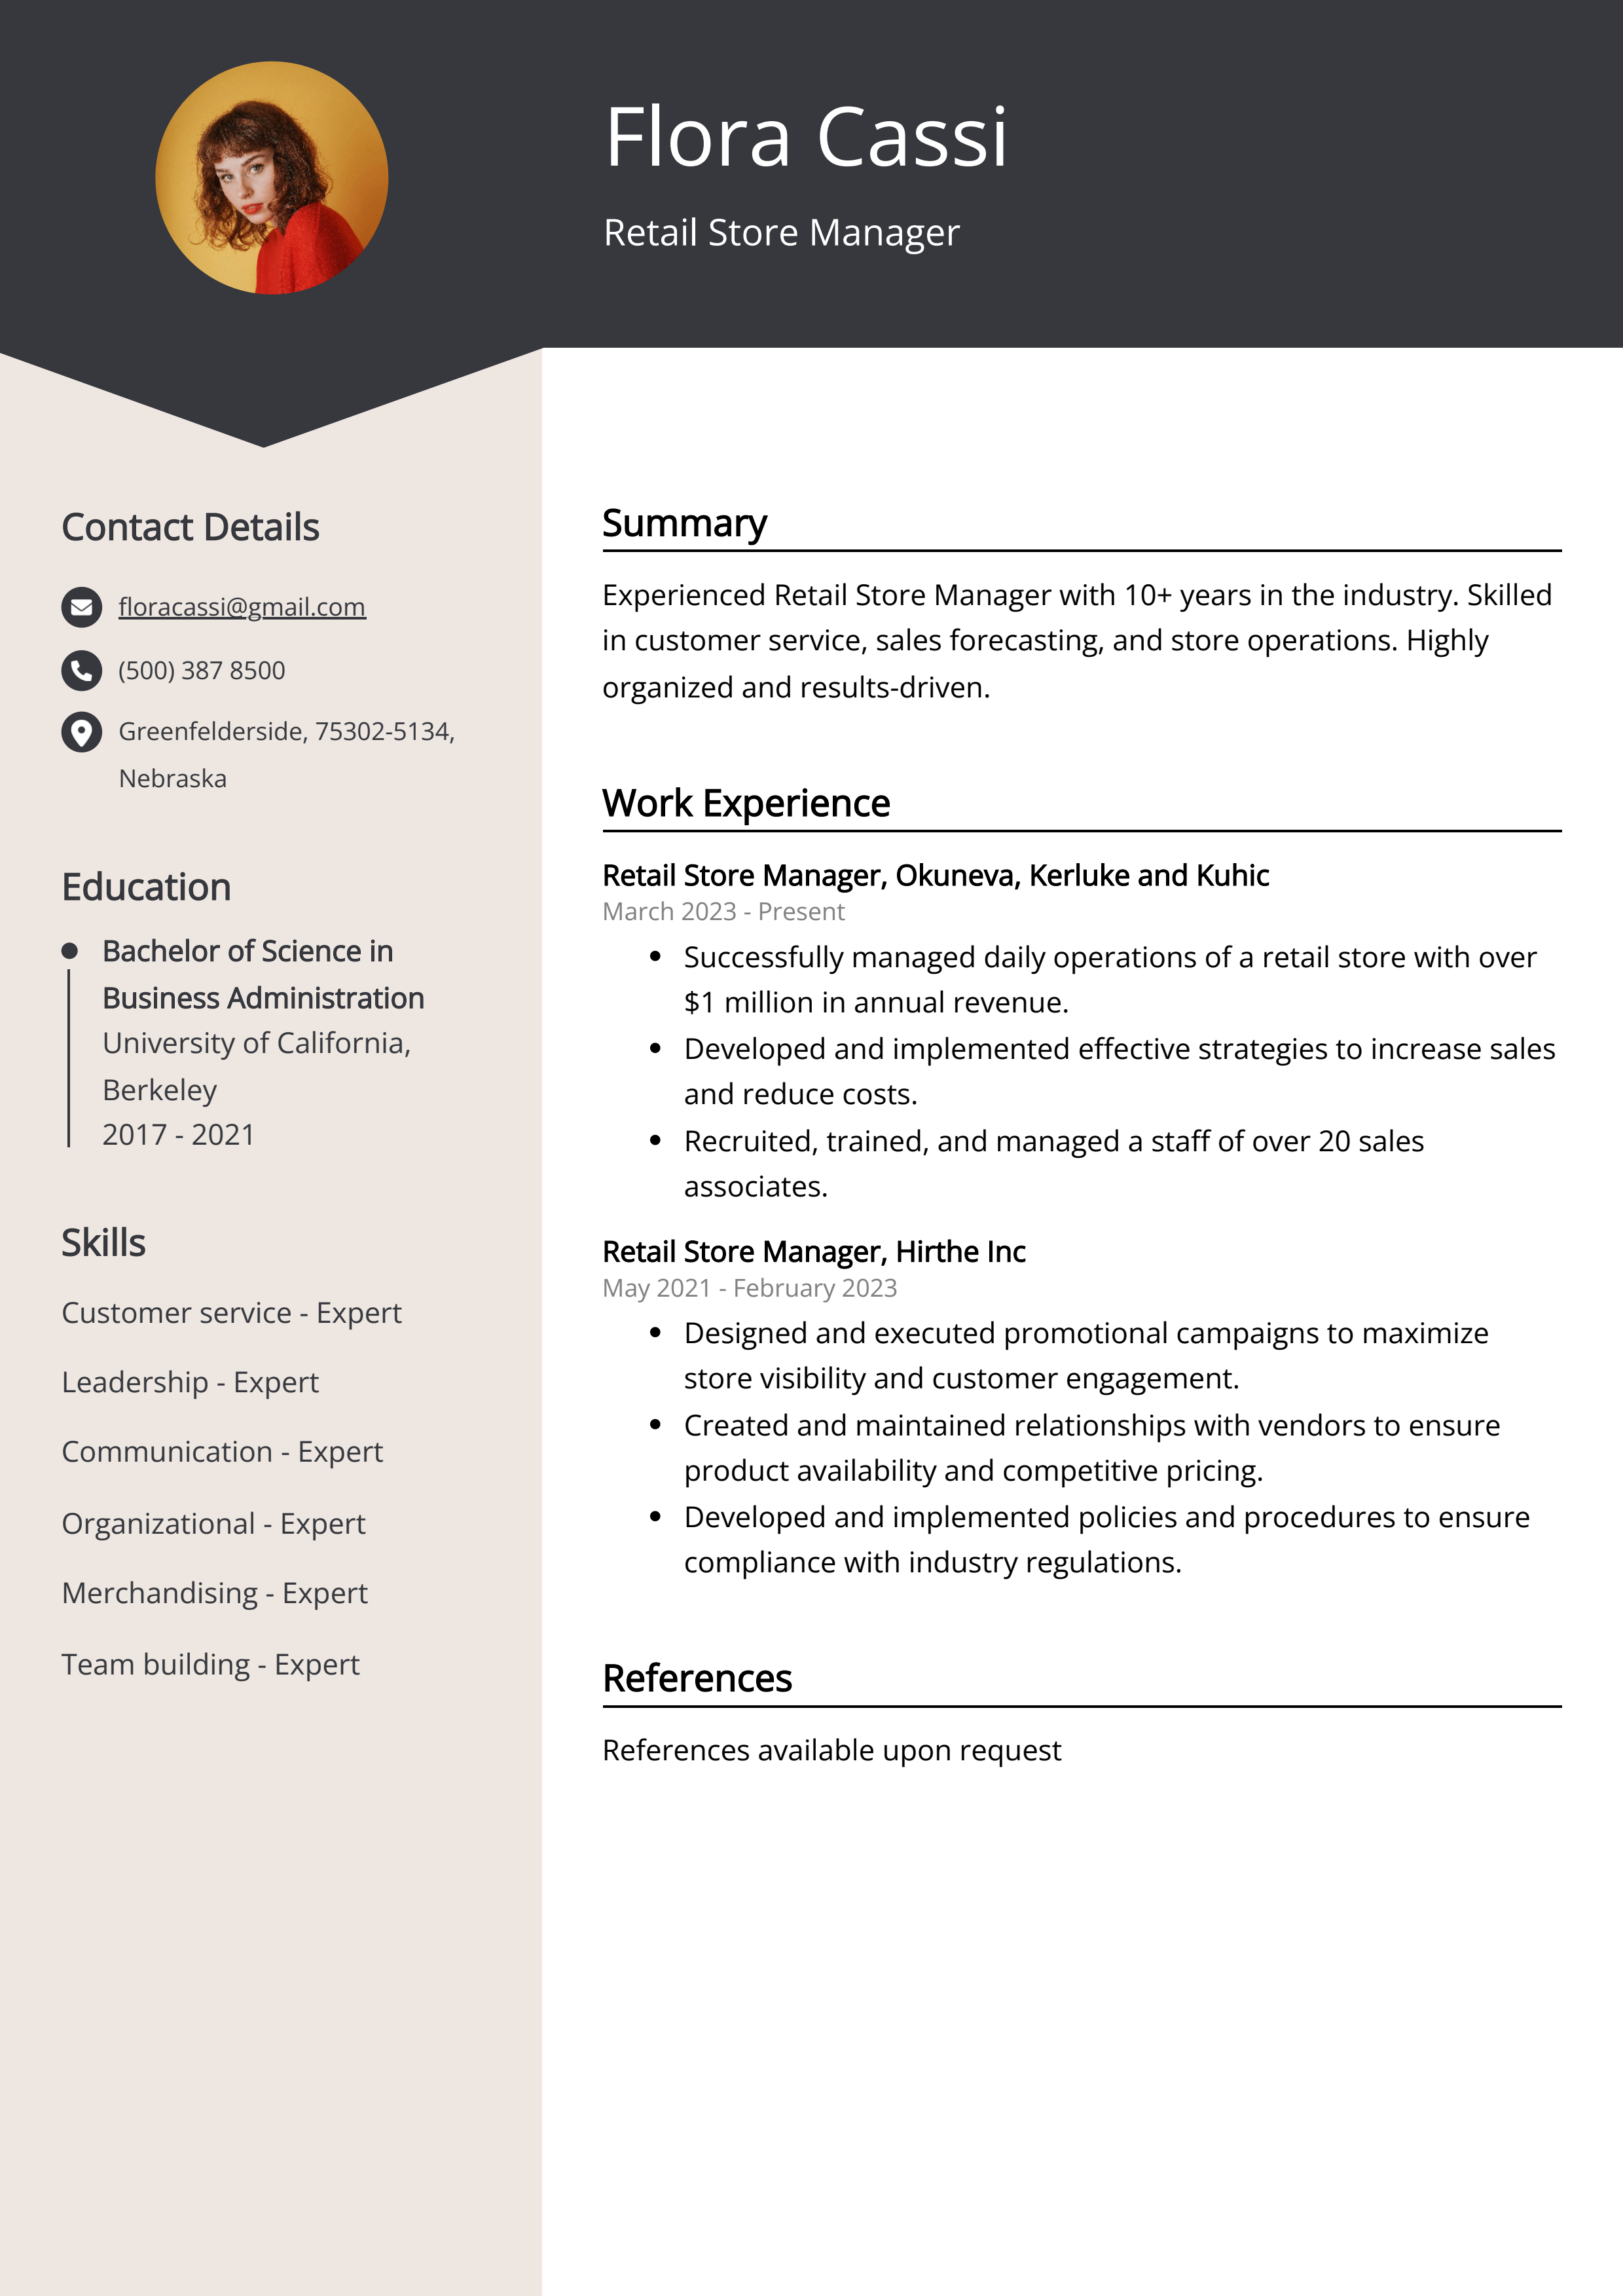 Retail Store Manager CV Example